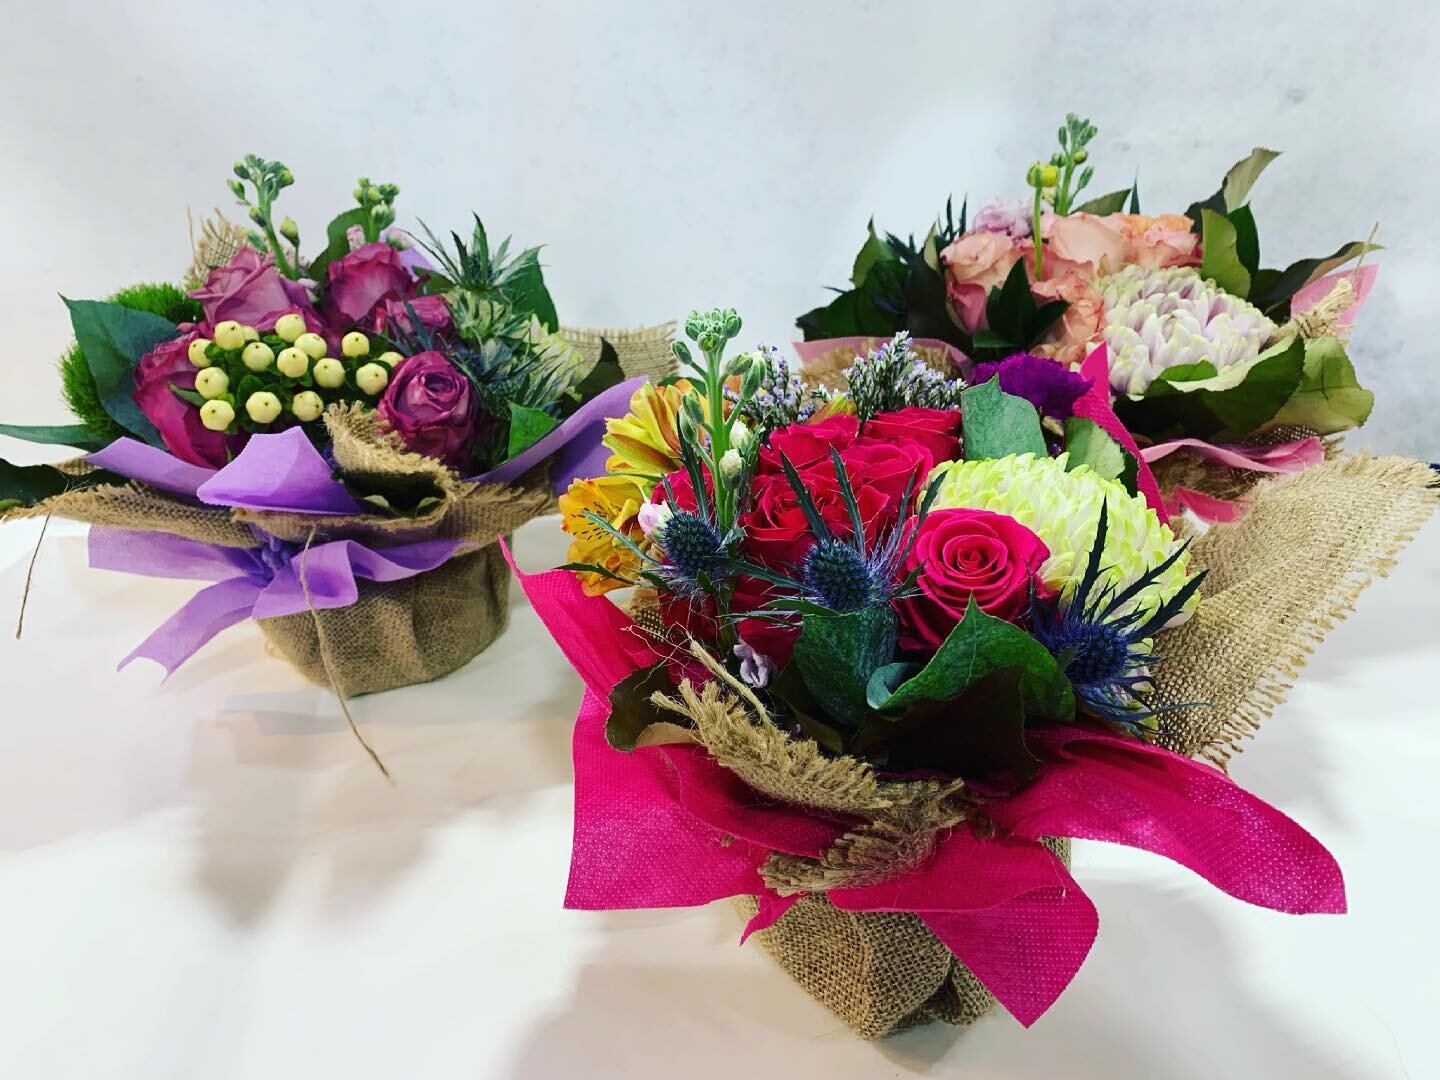 Mother&rsquo;s Day is just around the corner and it&rsquo;s never too early to pre-book for this monstrous floral holiday! Stop in and check out these adorable arrangements available for May.  Give yourself a little labor reliever. Limited availabili